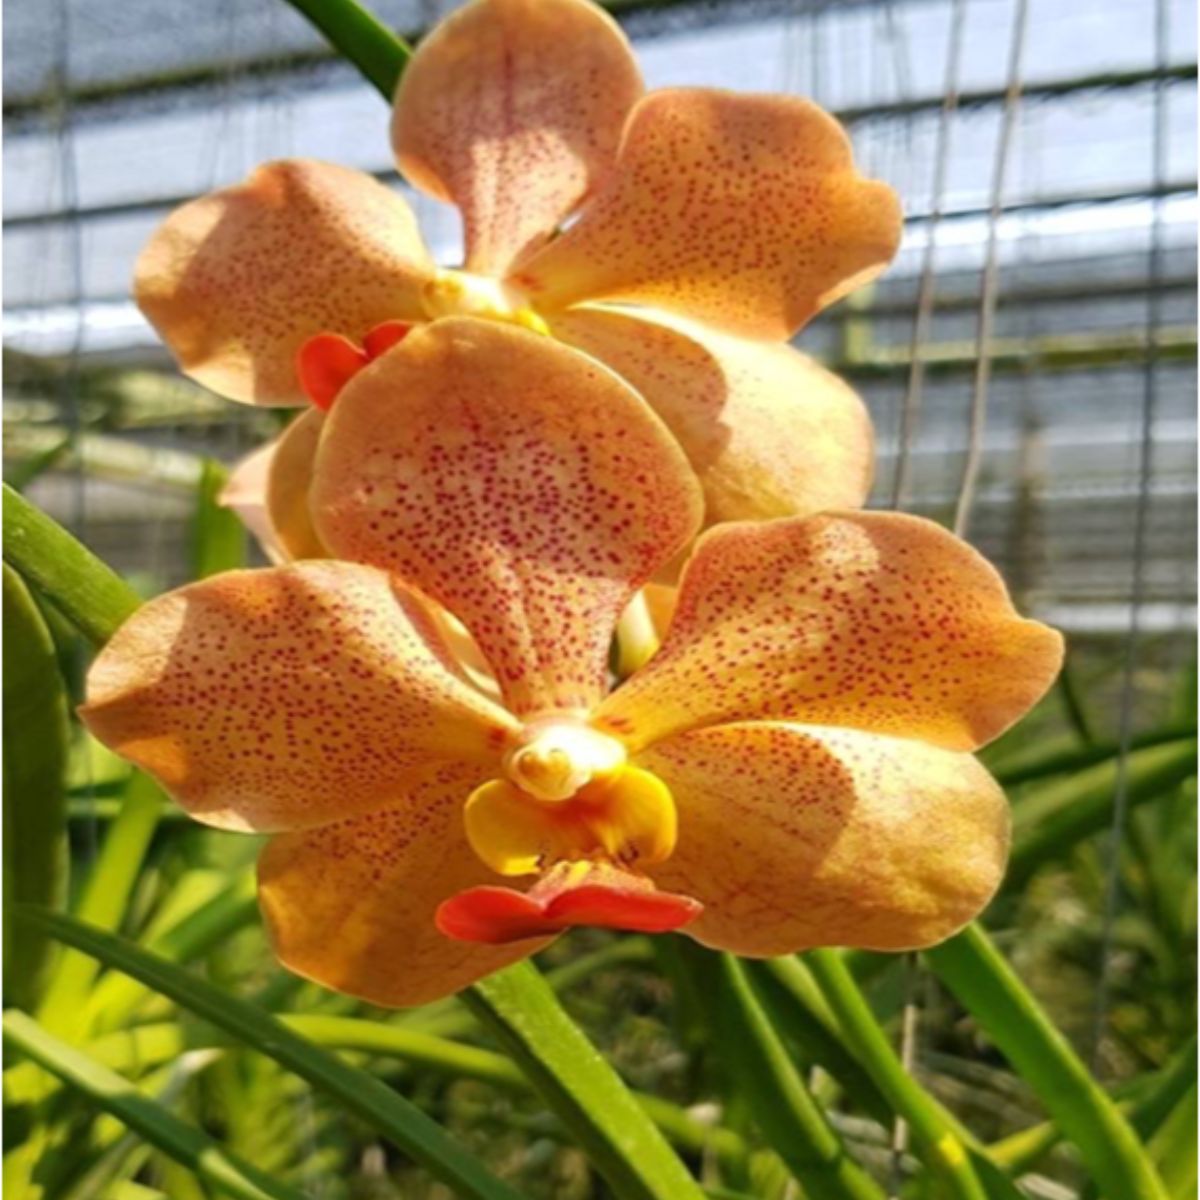 Vanda Josephine Yellow Orchid - Exquisite yellow orchid with intricate patterned petals